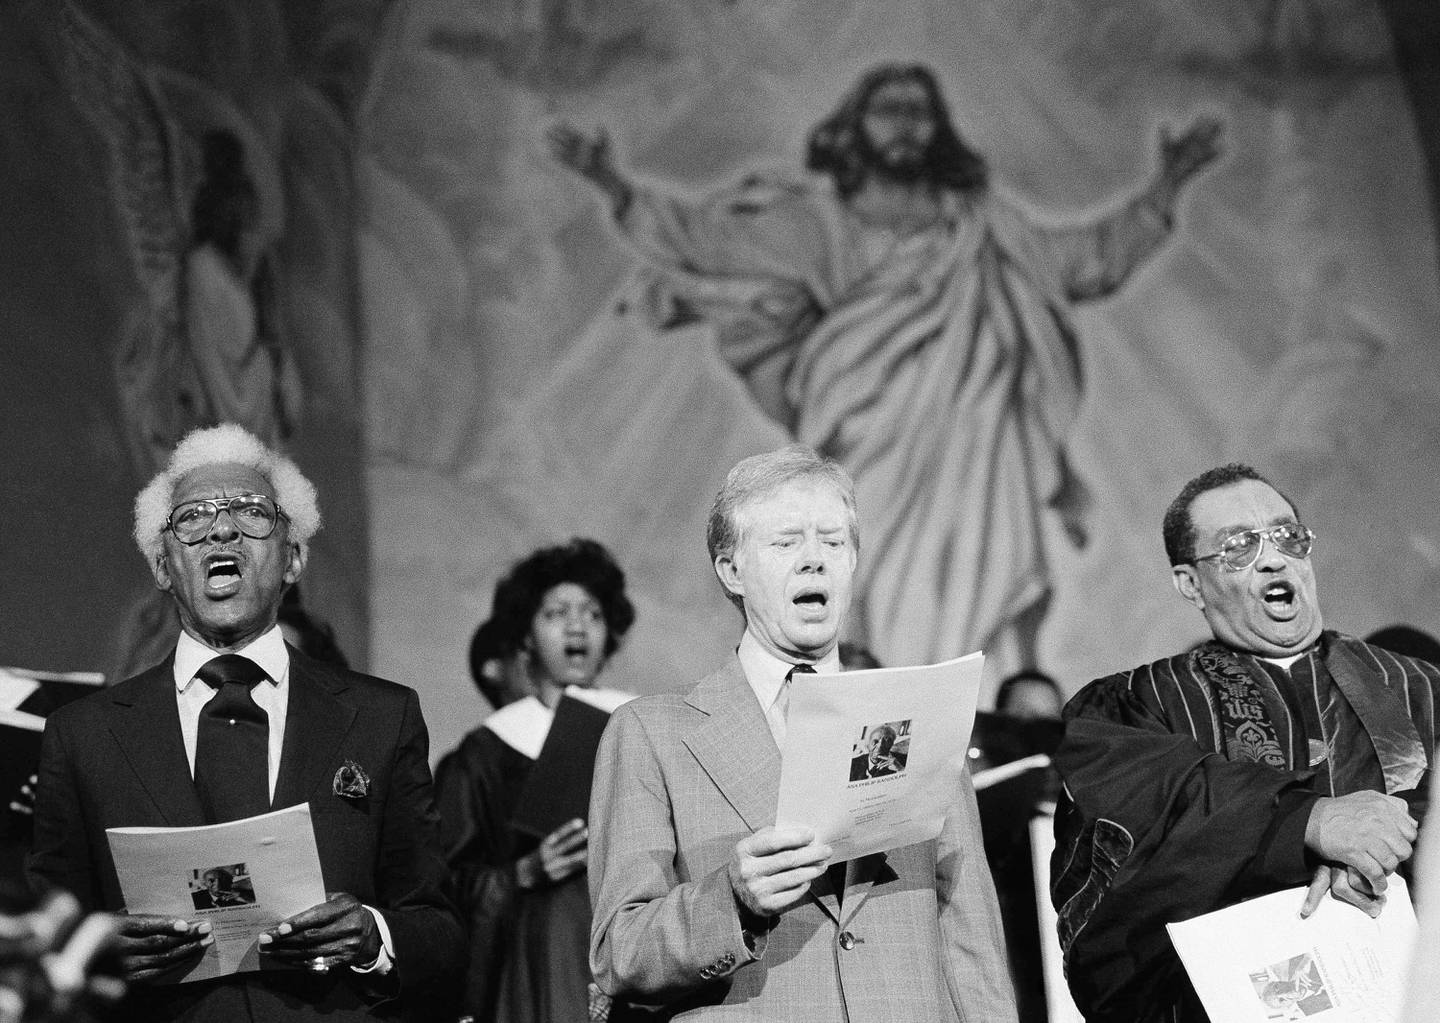 President Jimmy Carter, along with Bayard Rustin, left, and Bishop Henry Murph sing at a memorial service for the late civil rights leader A. Philip Randolph, June 4, 1979 at the Washington Metropolitan African Methodist and Episcopal Church. (AP Photo)